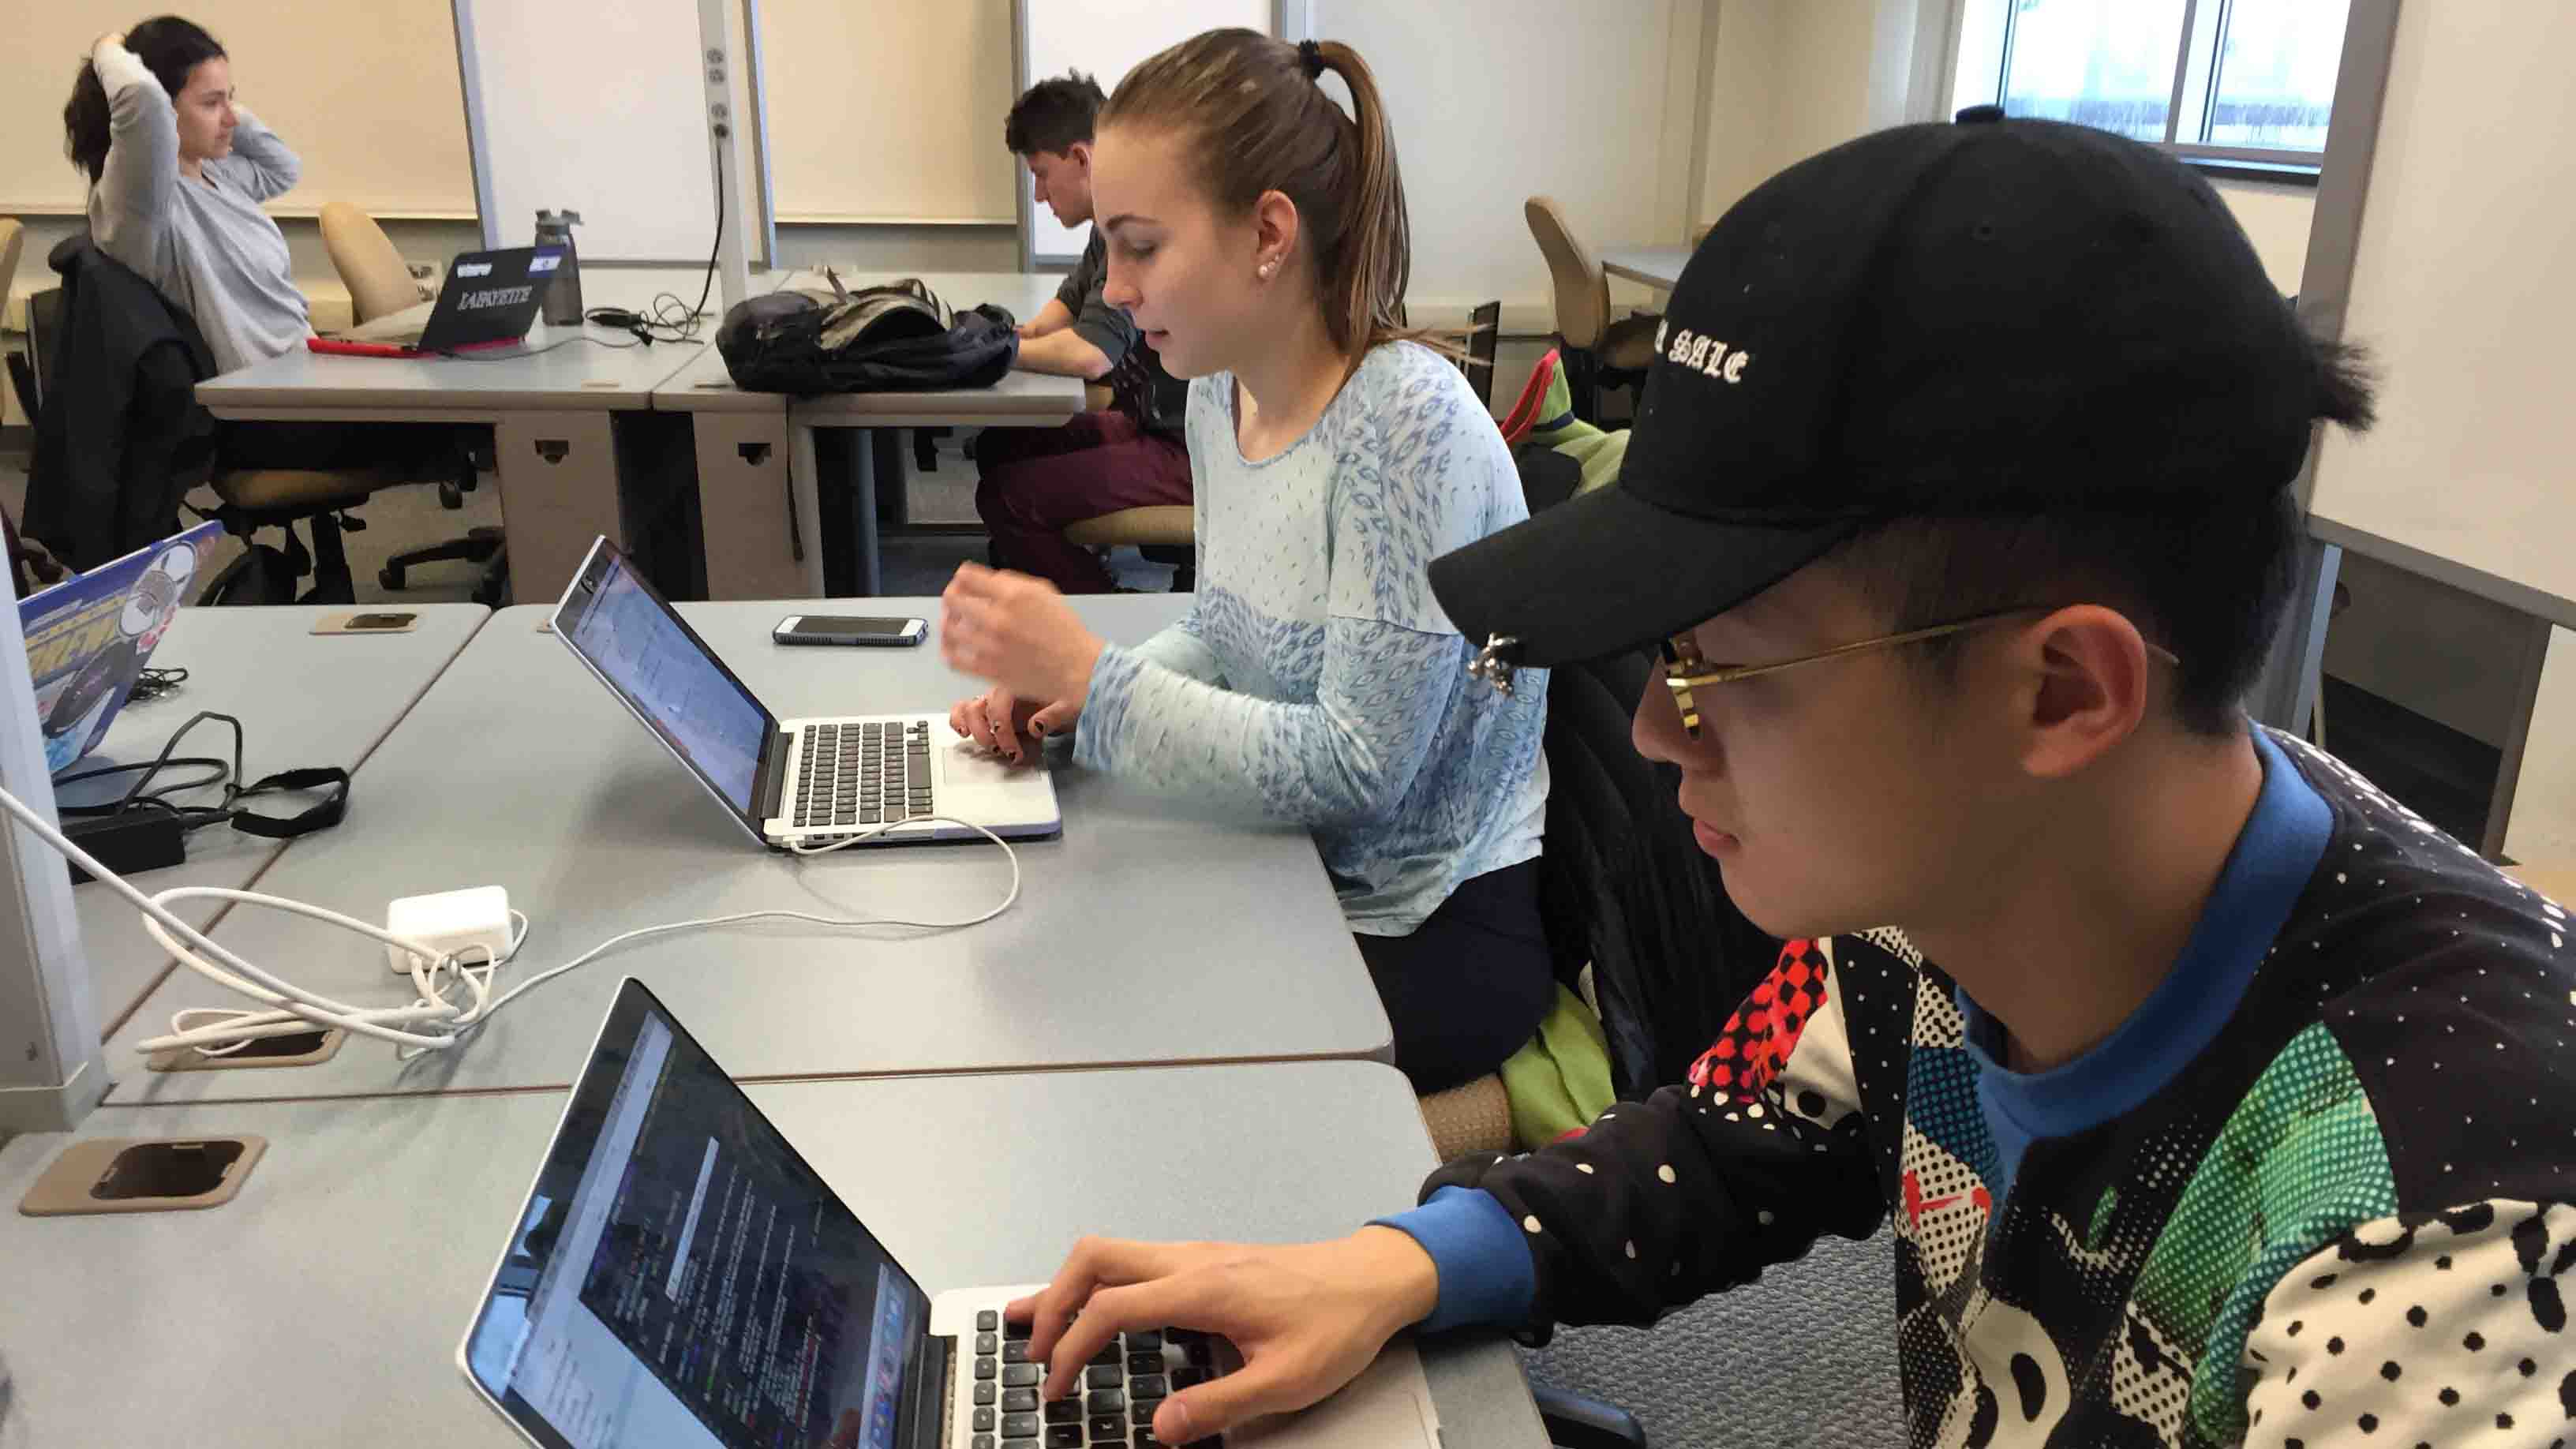 Students use laptop computers to work in the Computer Science Thinking Room.